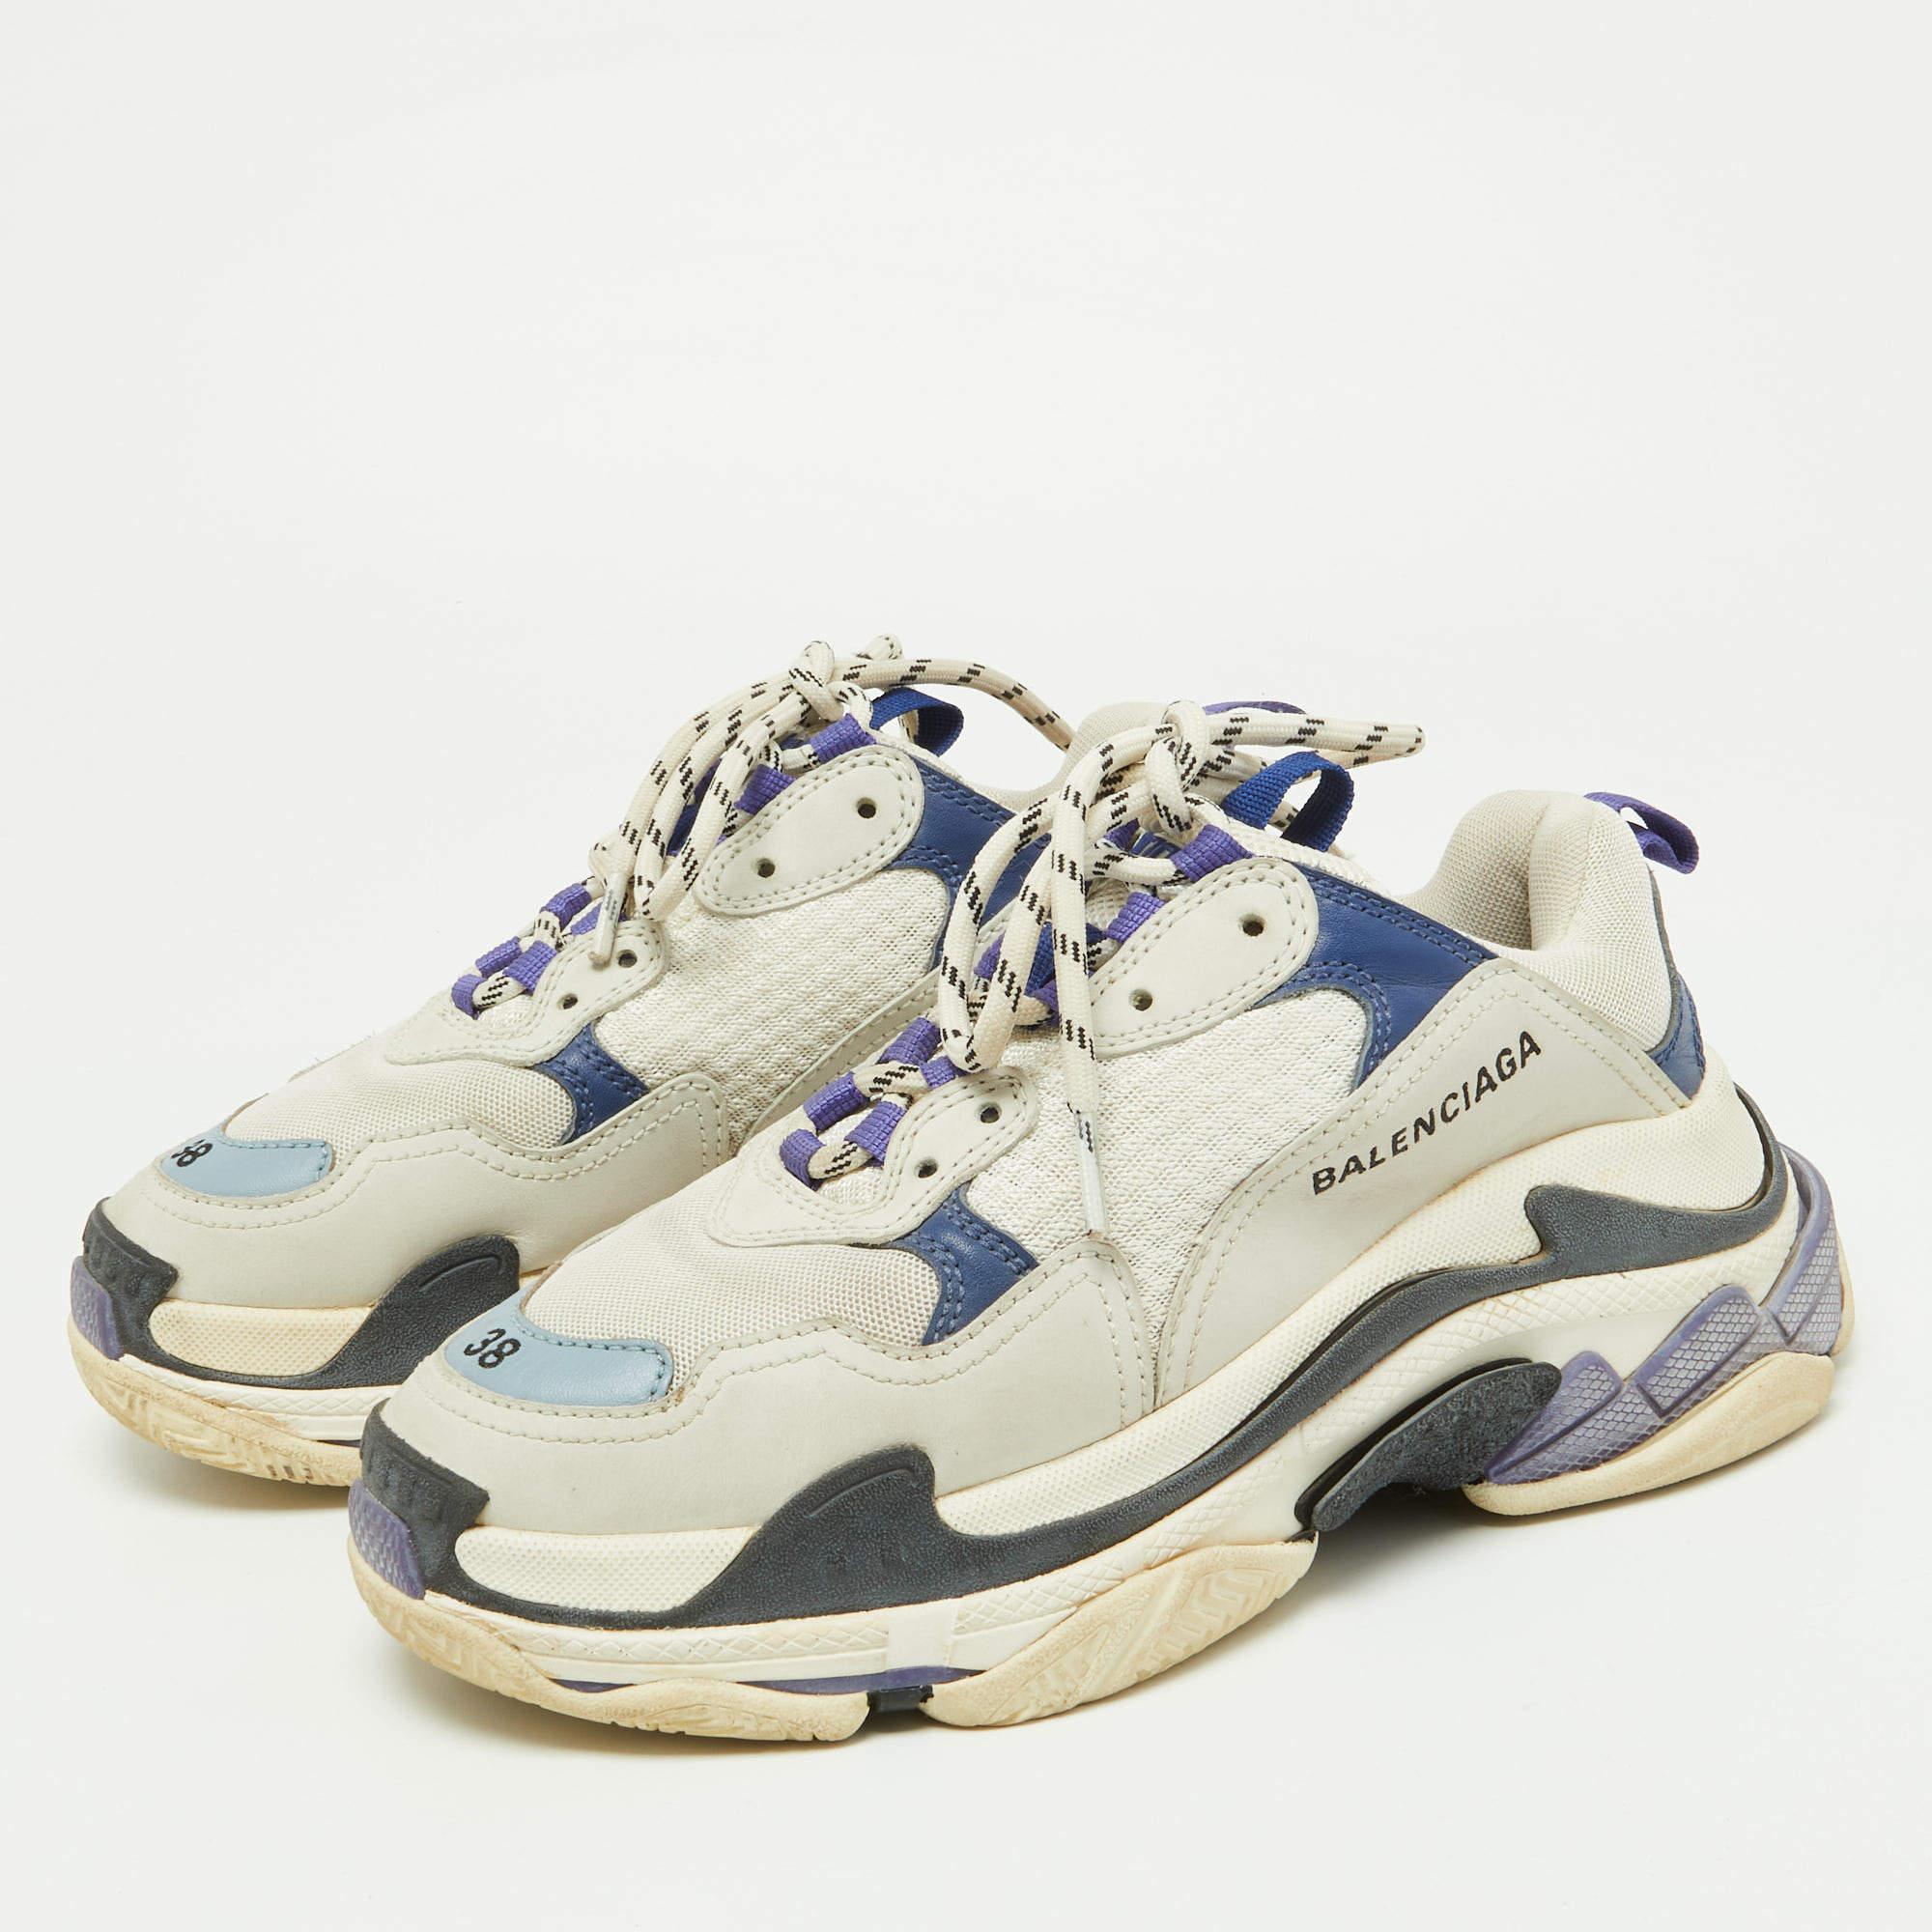 Balenciaga Multicolor Leather and Mesh Triple S Sneakers Size 38 For Sale 3